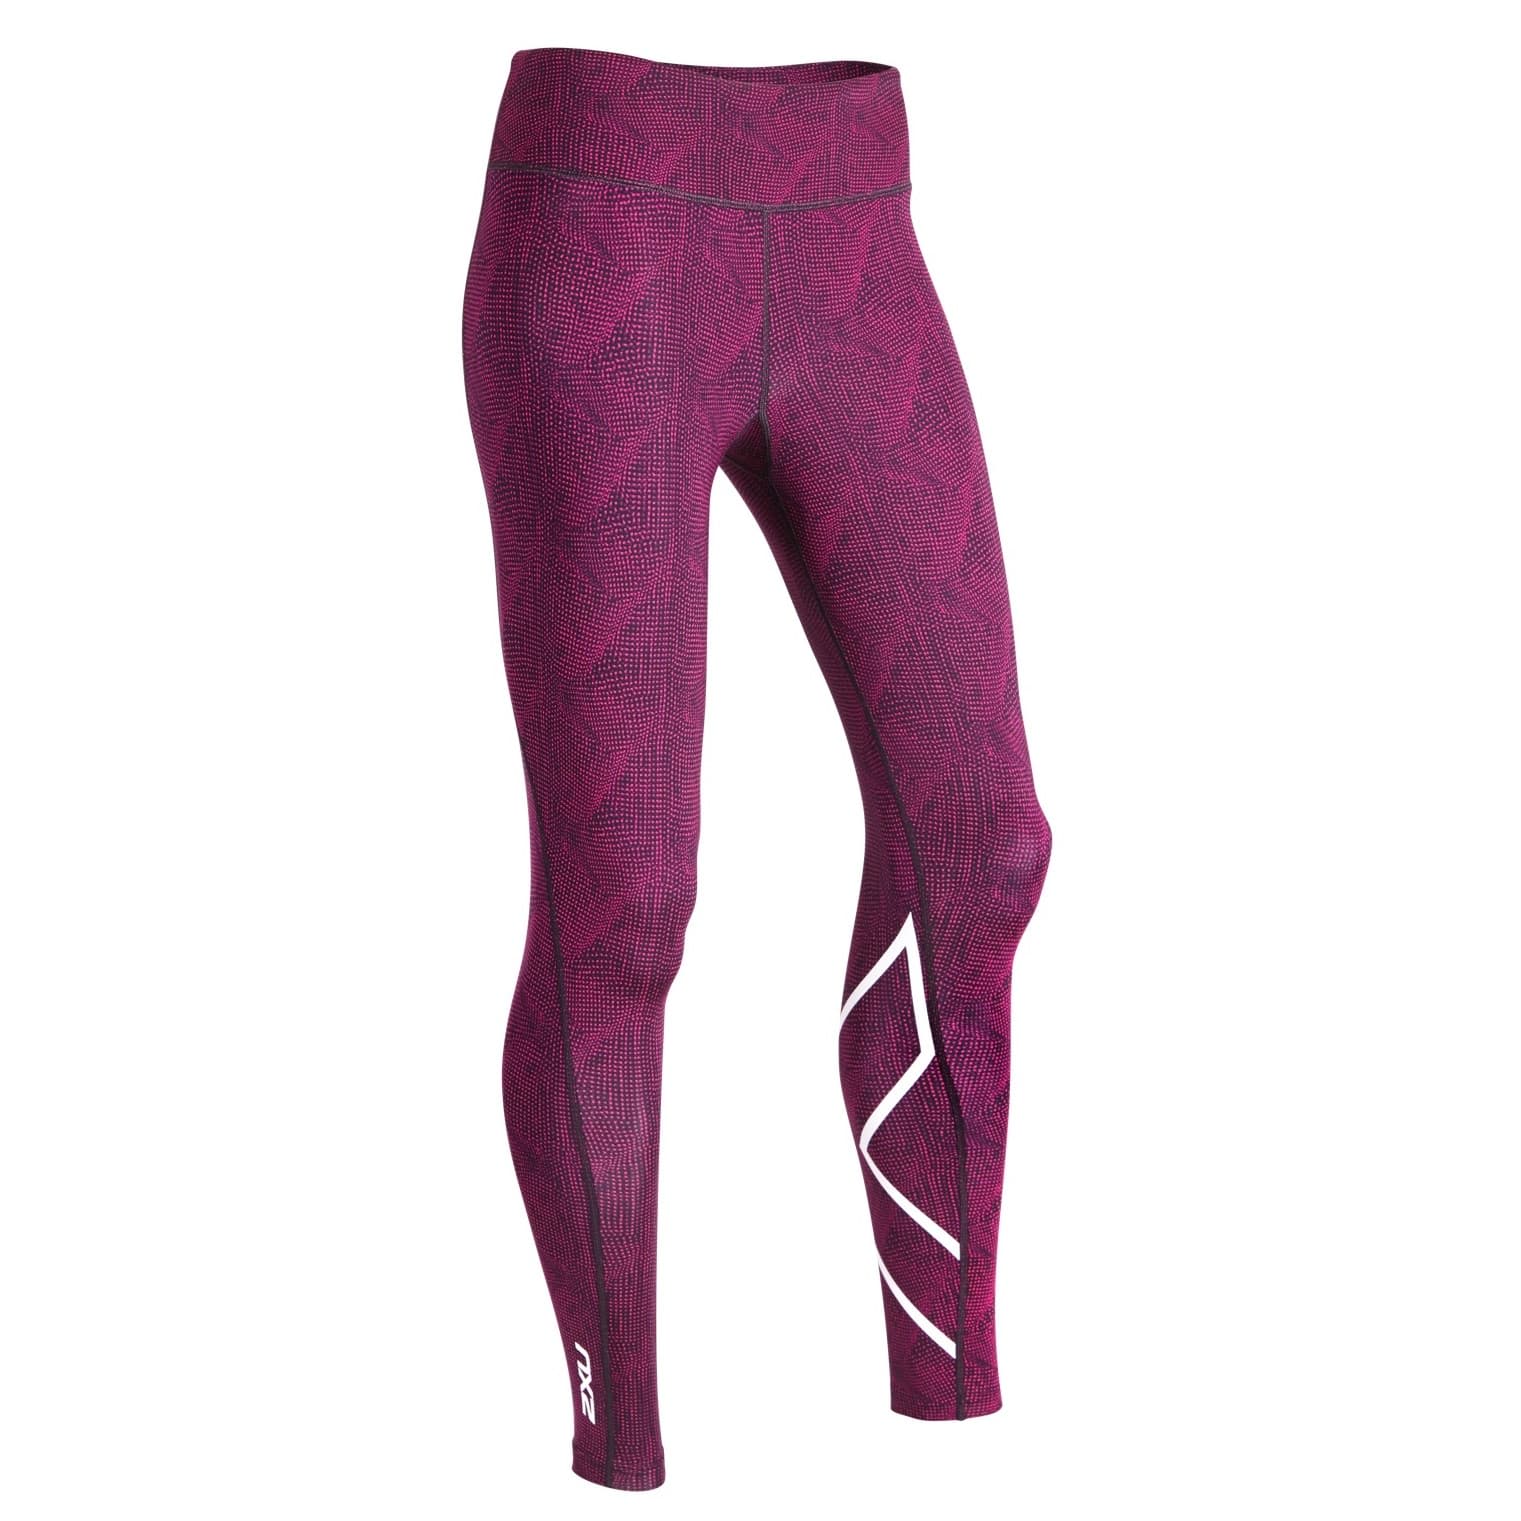 aflivning vente Ewell Buy 2XU Women's Mid-Rise Print Compression Tights Storage from Outnorth